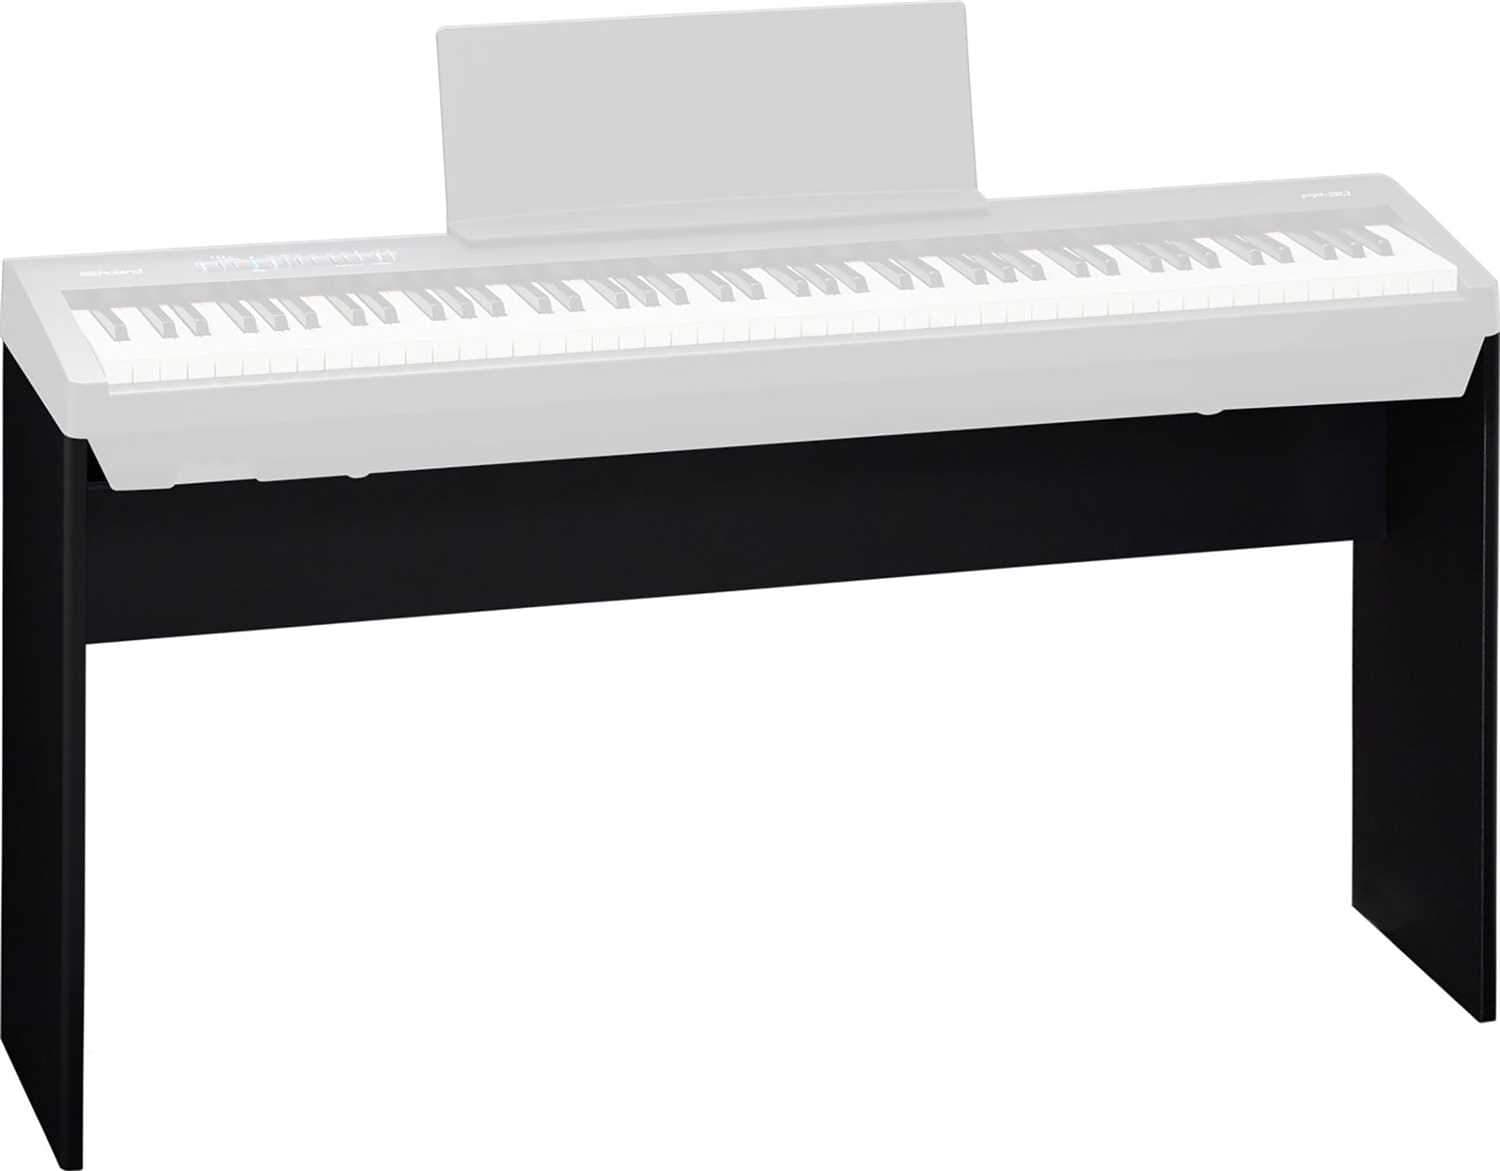 Roland Ksc 70 Bk Stand For Fp 30 Bk Digital Piano Prosound And Stage Lighting